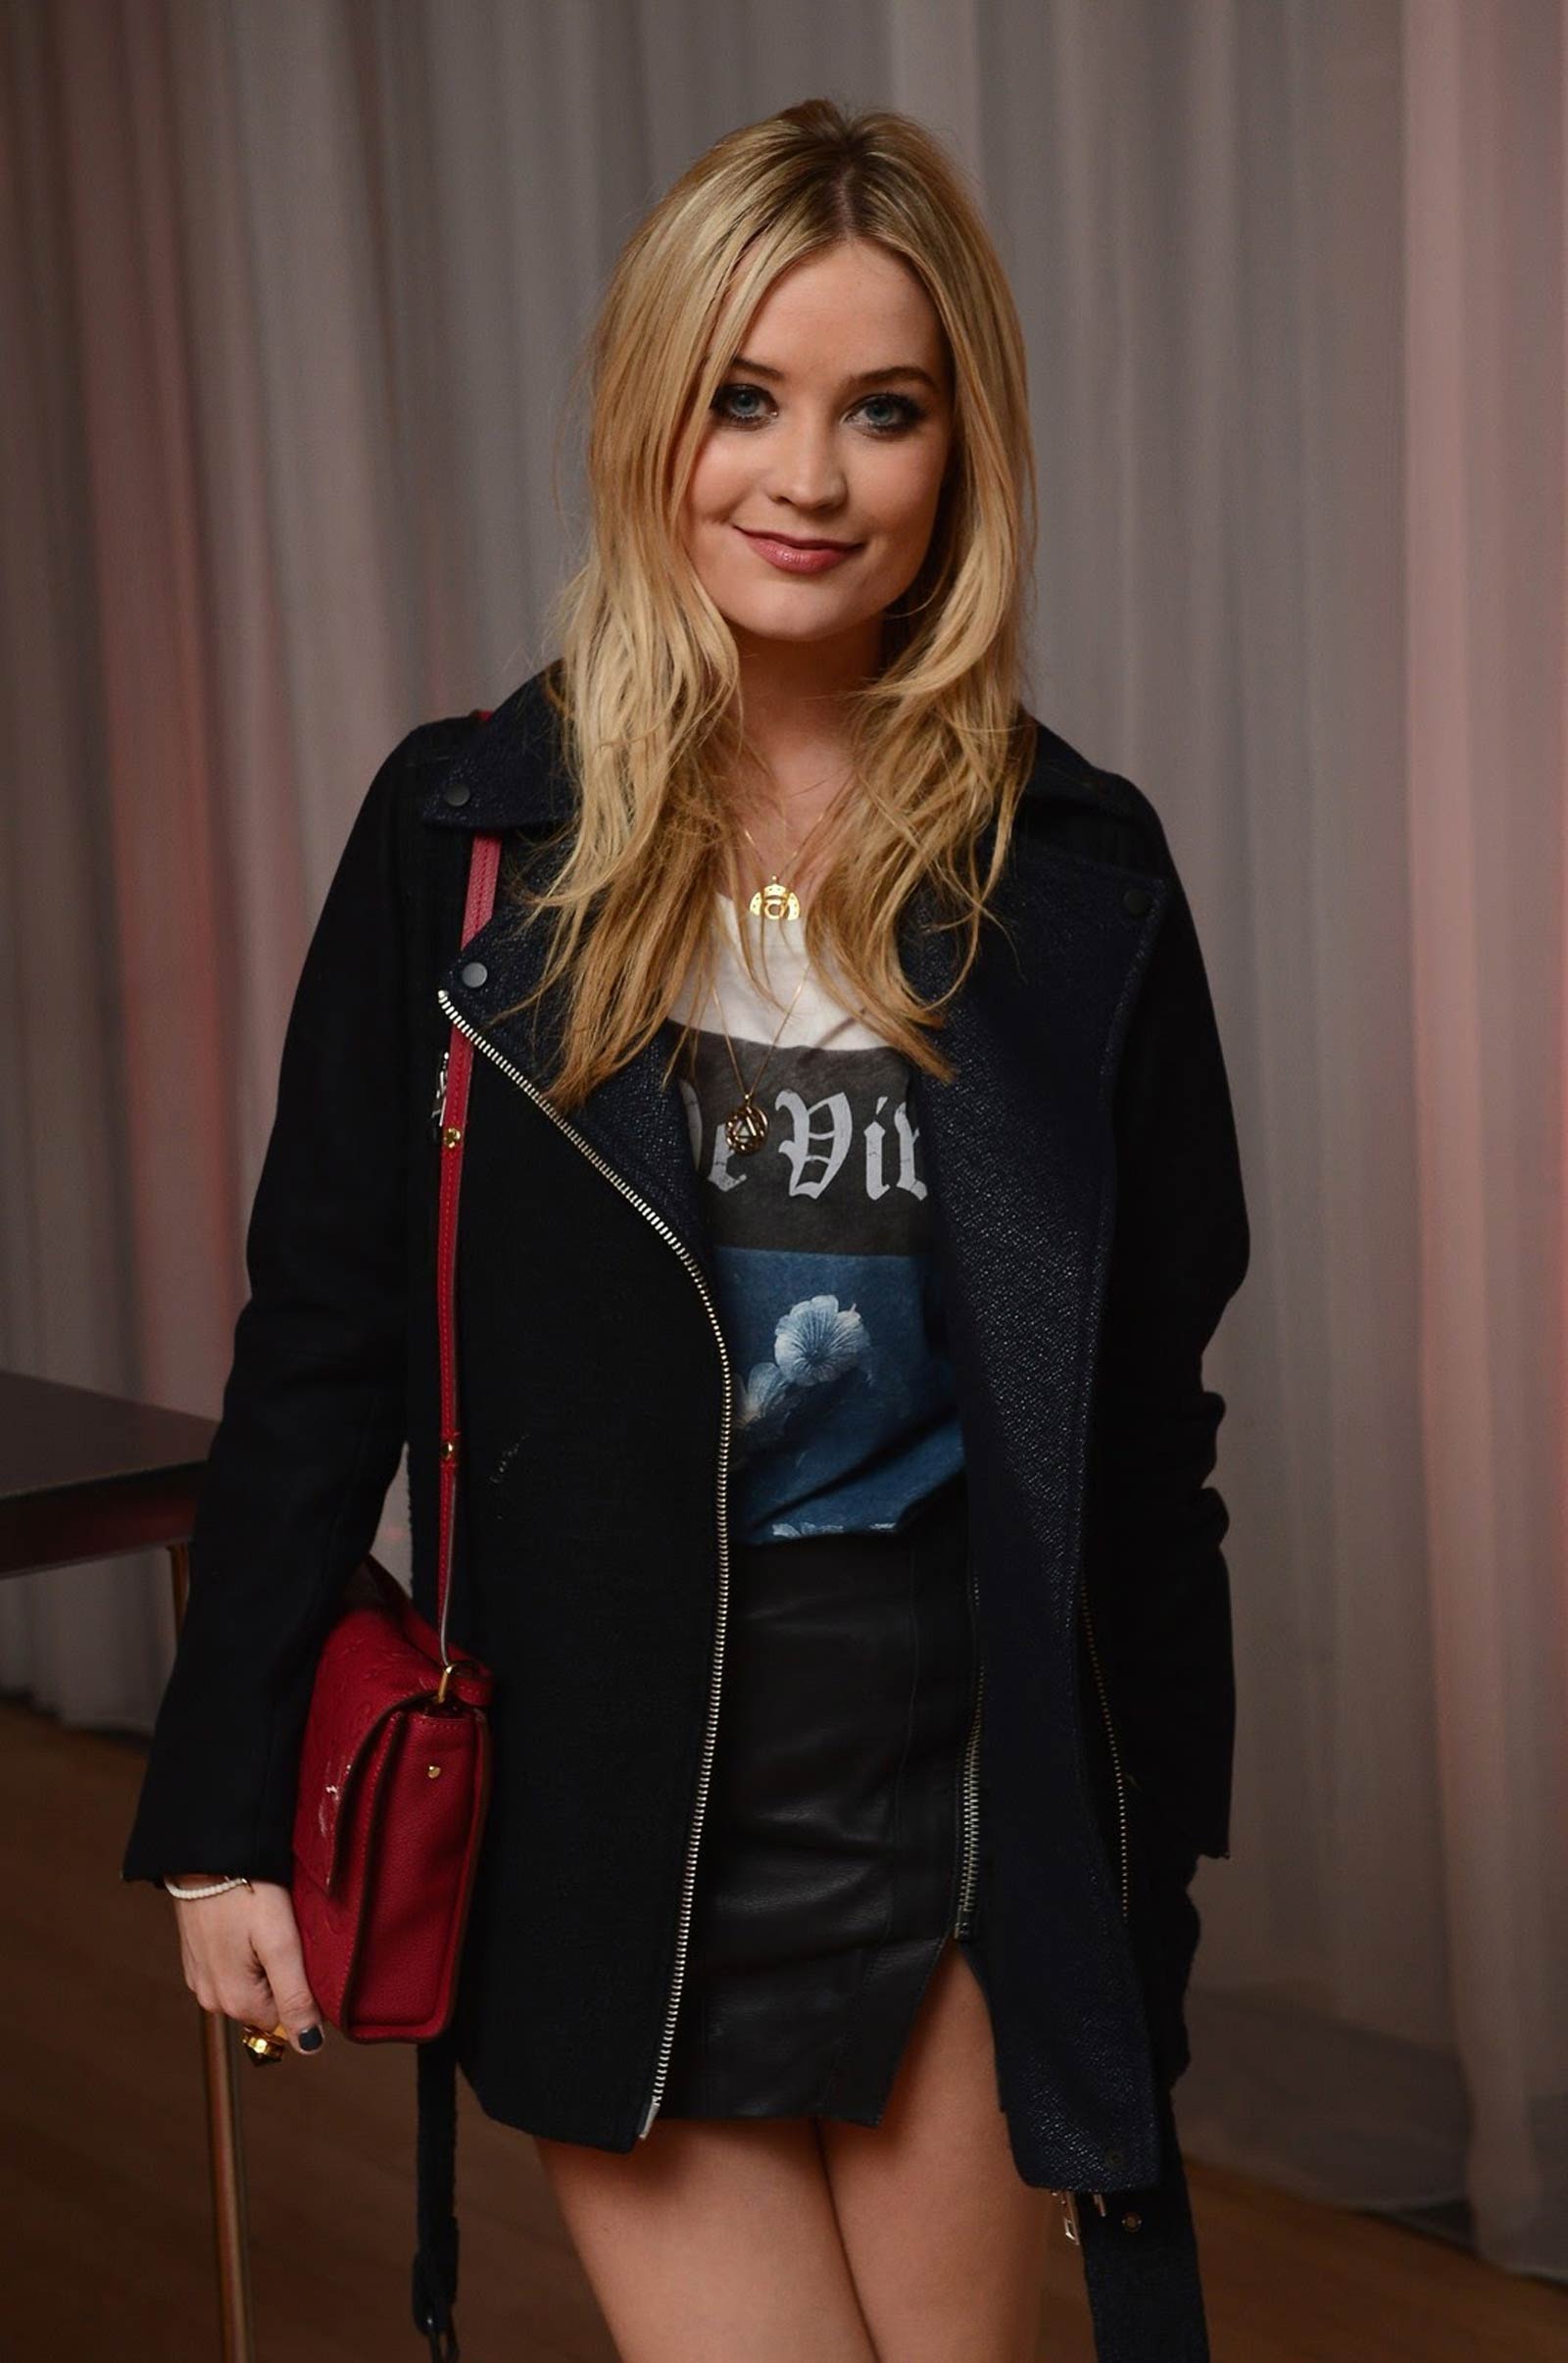 Laura Whitmore attends the World Premiere of One Direction